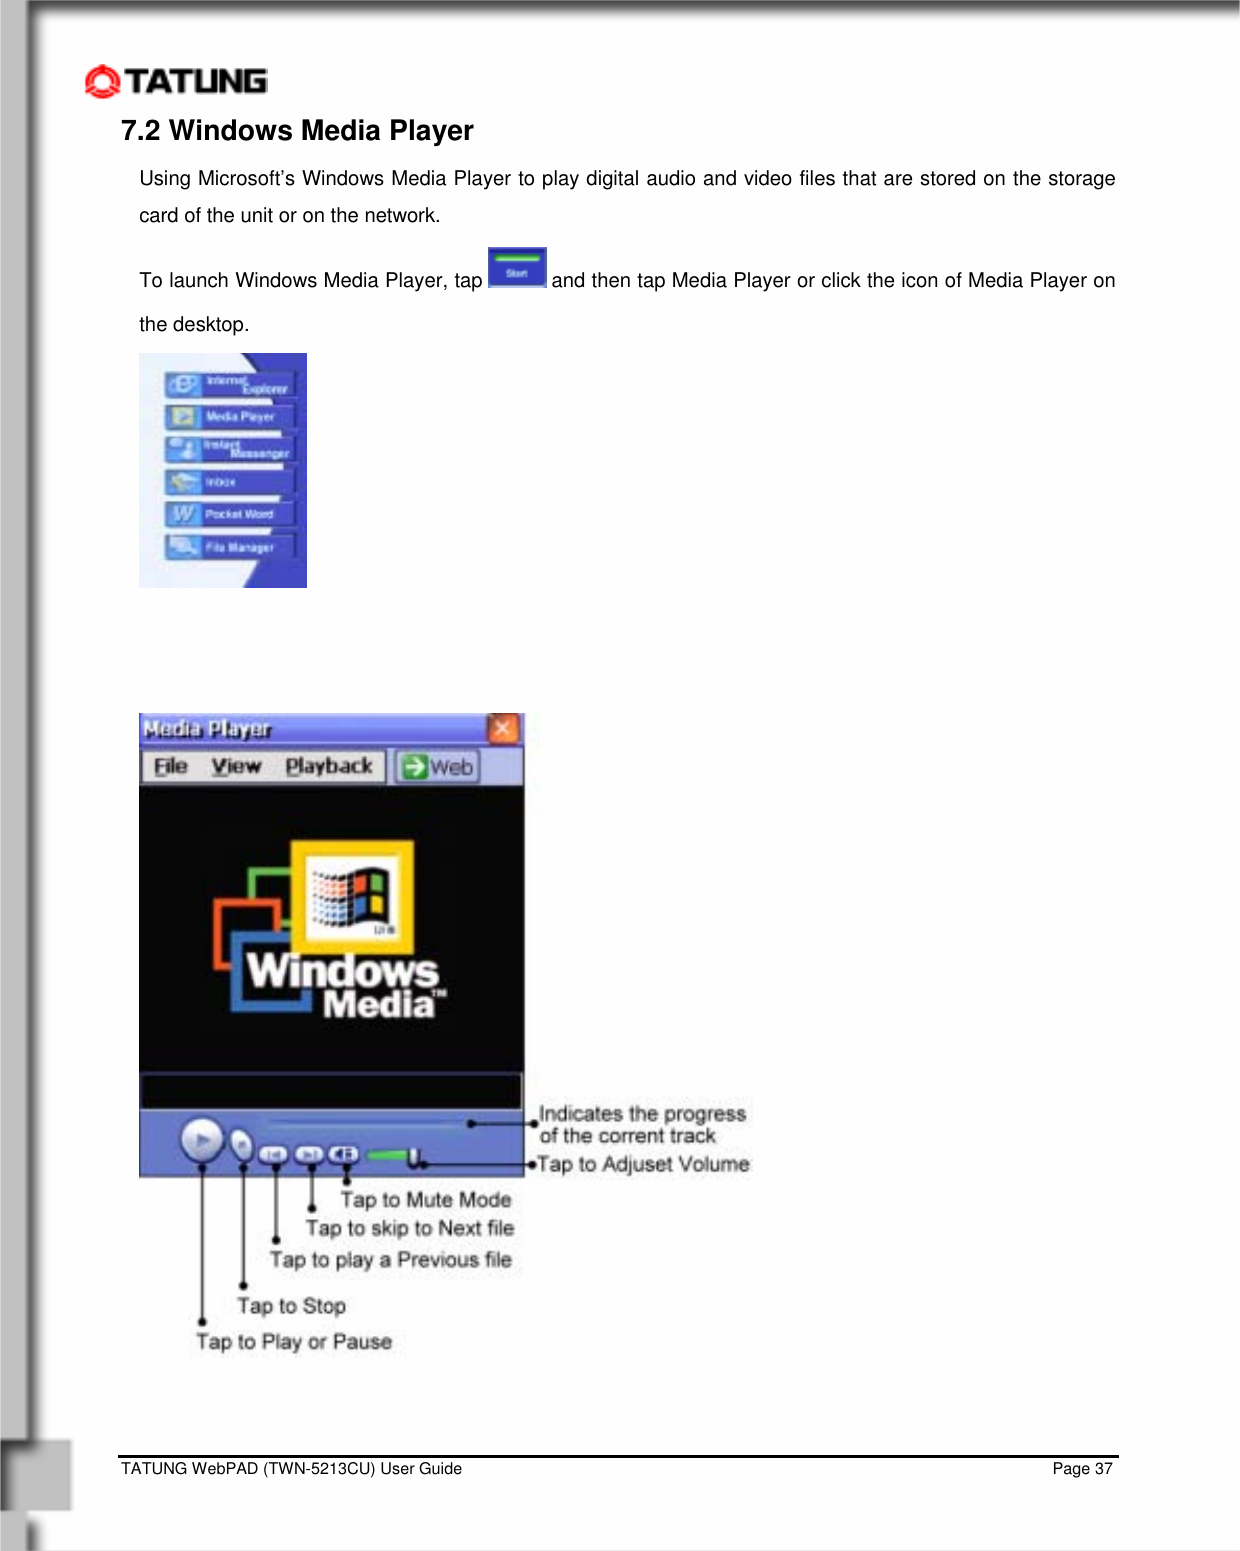    TATUNG WebPAD (TWN-5213CU) User Guide                                                                                                                                   Page 37 7.2 Windows Media Player Using Microsoft’s Windows Media Player to play digital audio and video files that are stored on the storage card of the unit or on the network. To launch Windows Media Player, tap   and then tap Media Player or click the icon of Media Player on the desktop.        